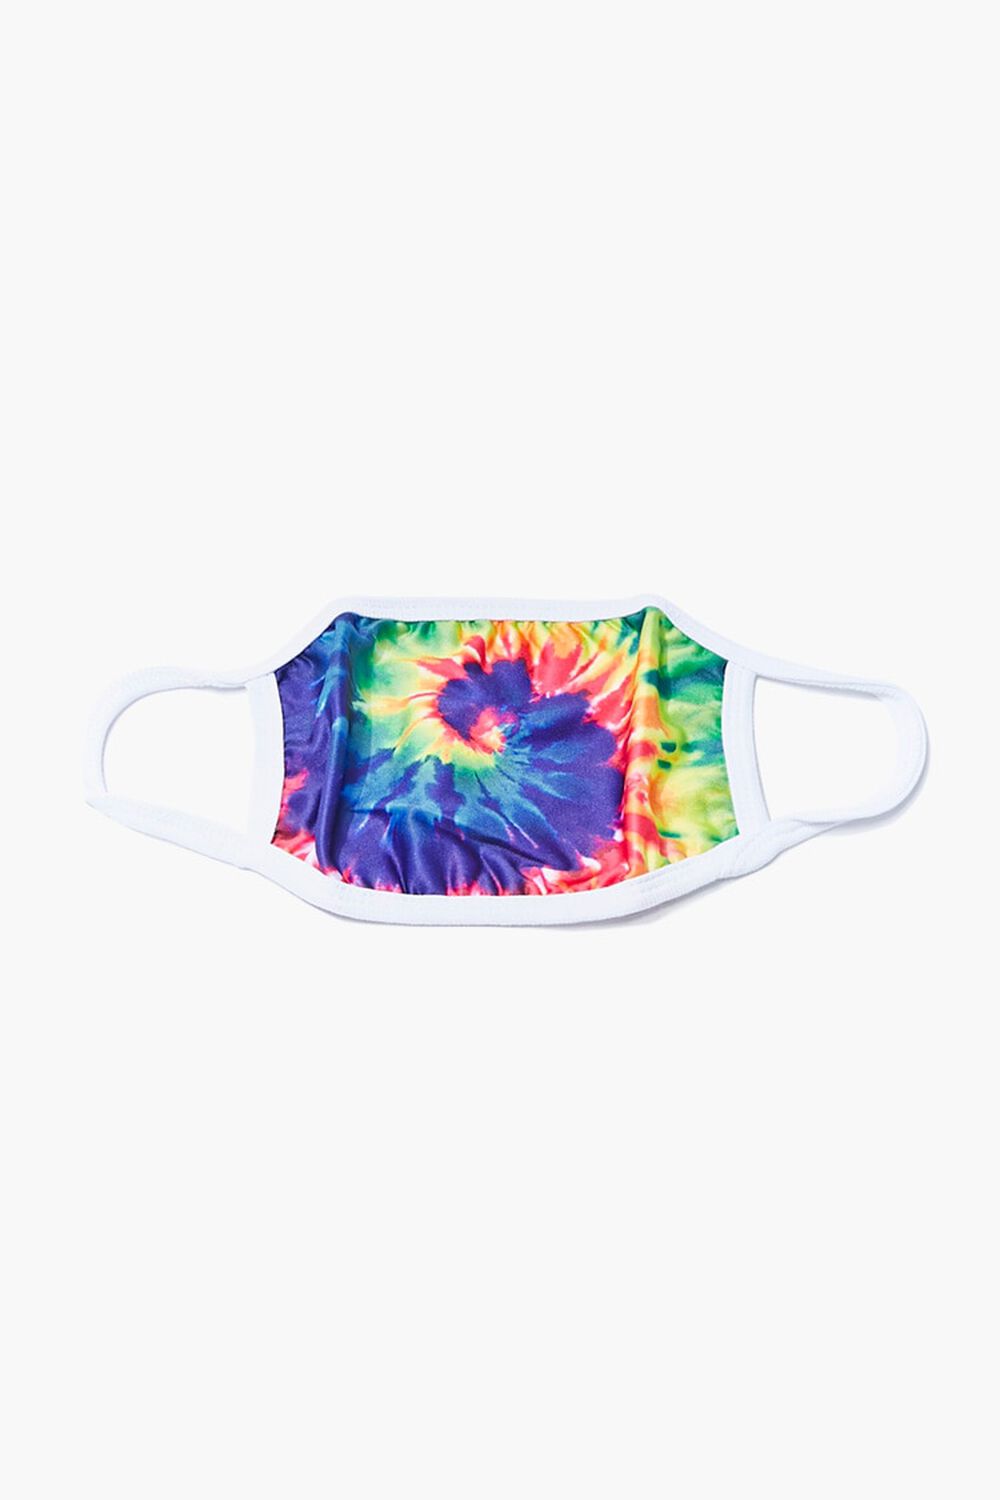 RED/MULTI Tie-Dye Face Mask, image 1